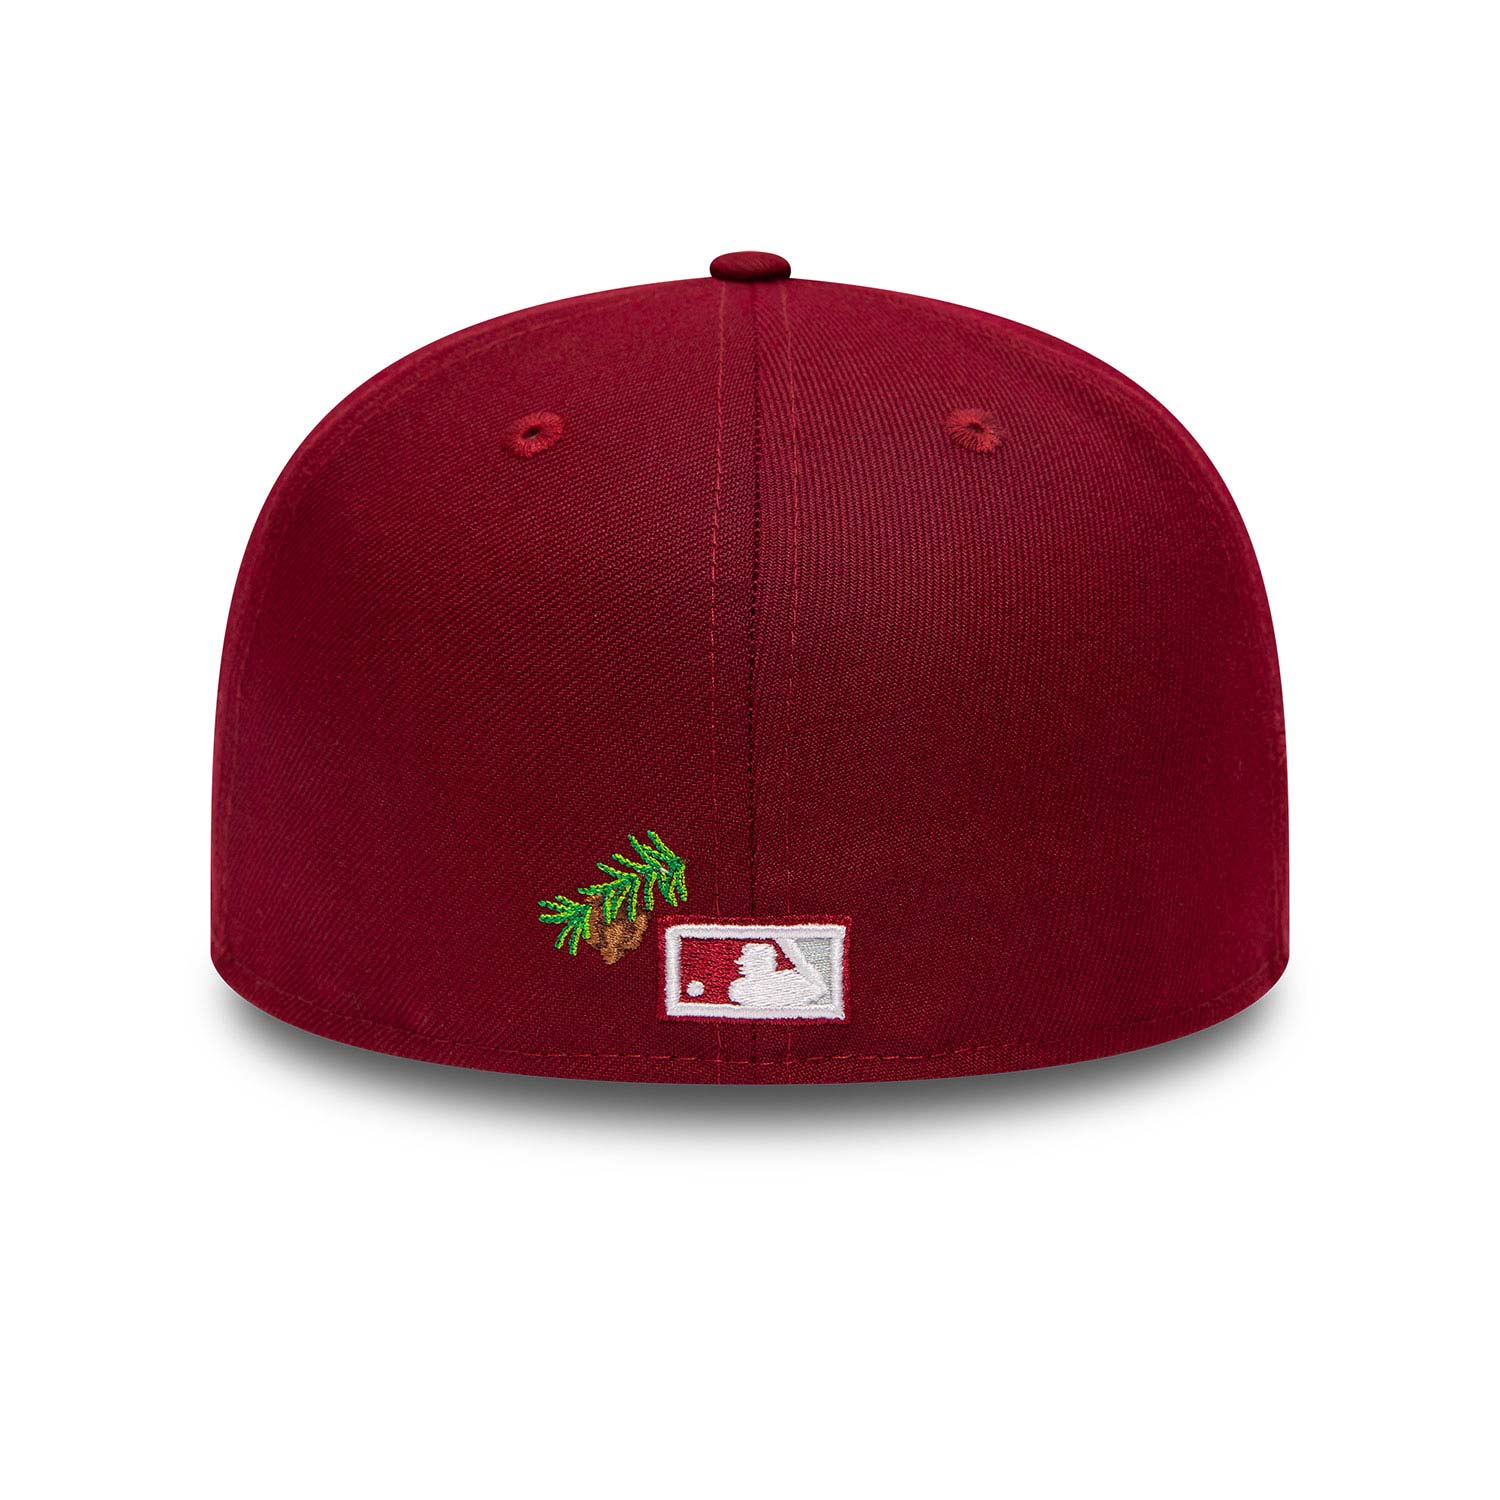 Philadelphia Phillies Stateview Red 59FIFTY Fitted Cap